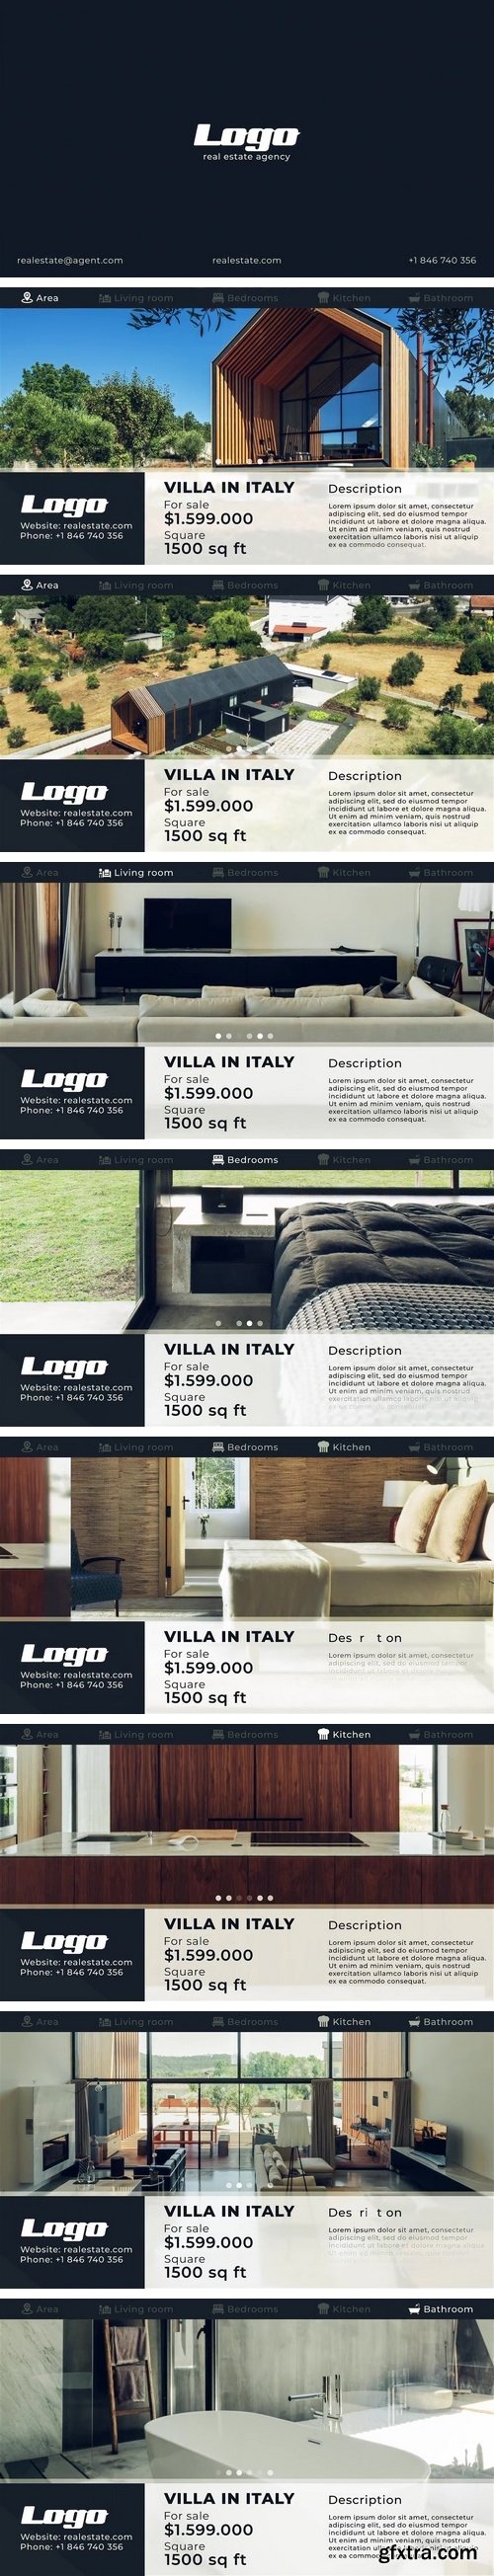 MotionArray - Real Estate Promo After Effects Templates 58886